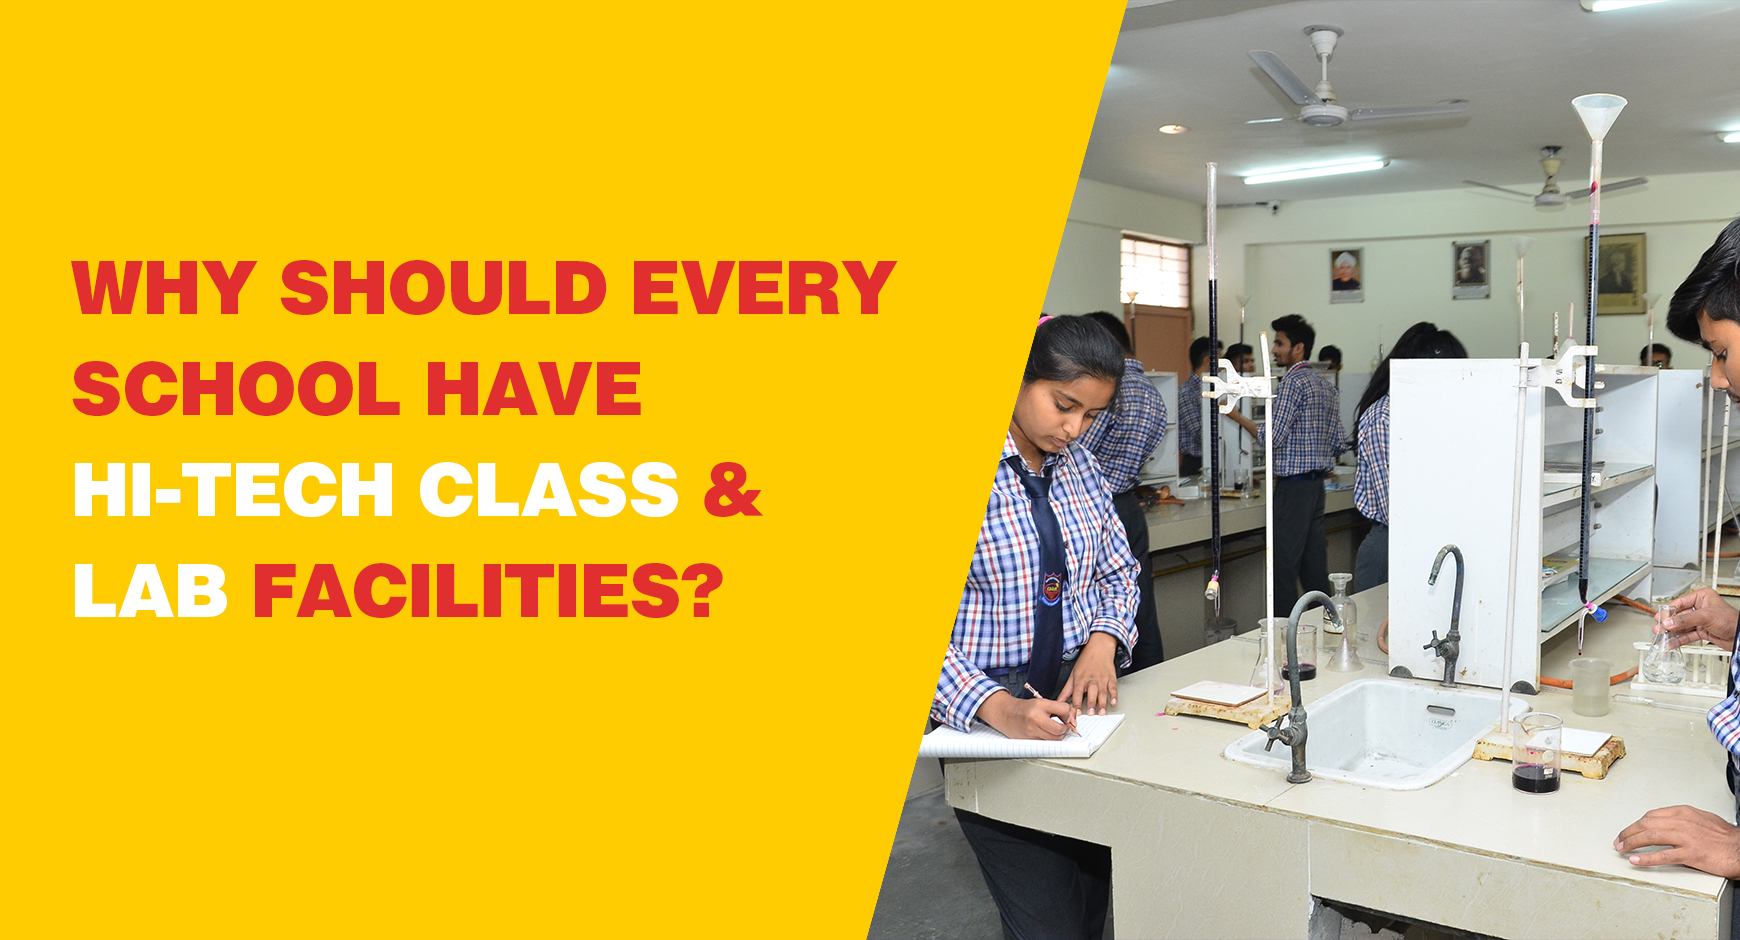 Why should every school have hi-tech Class & Lab facilities?